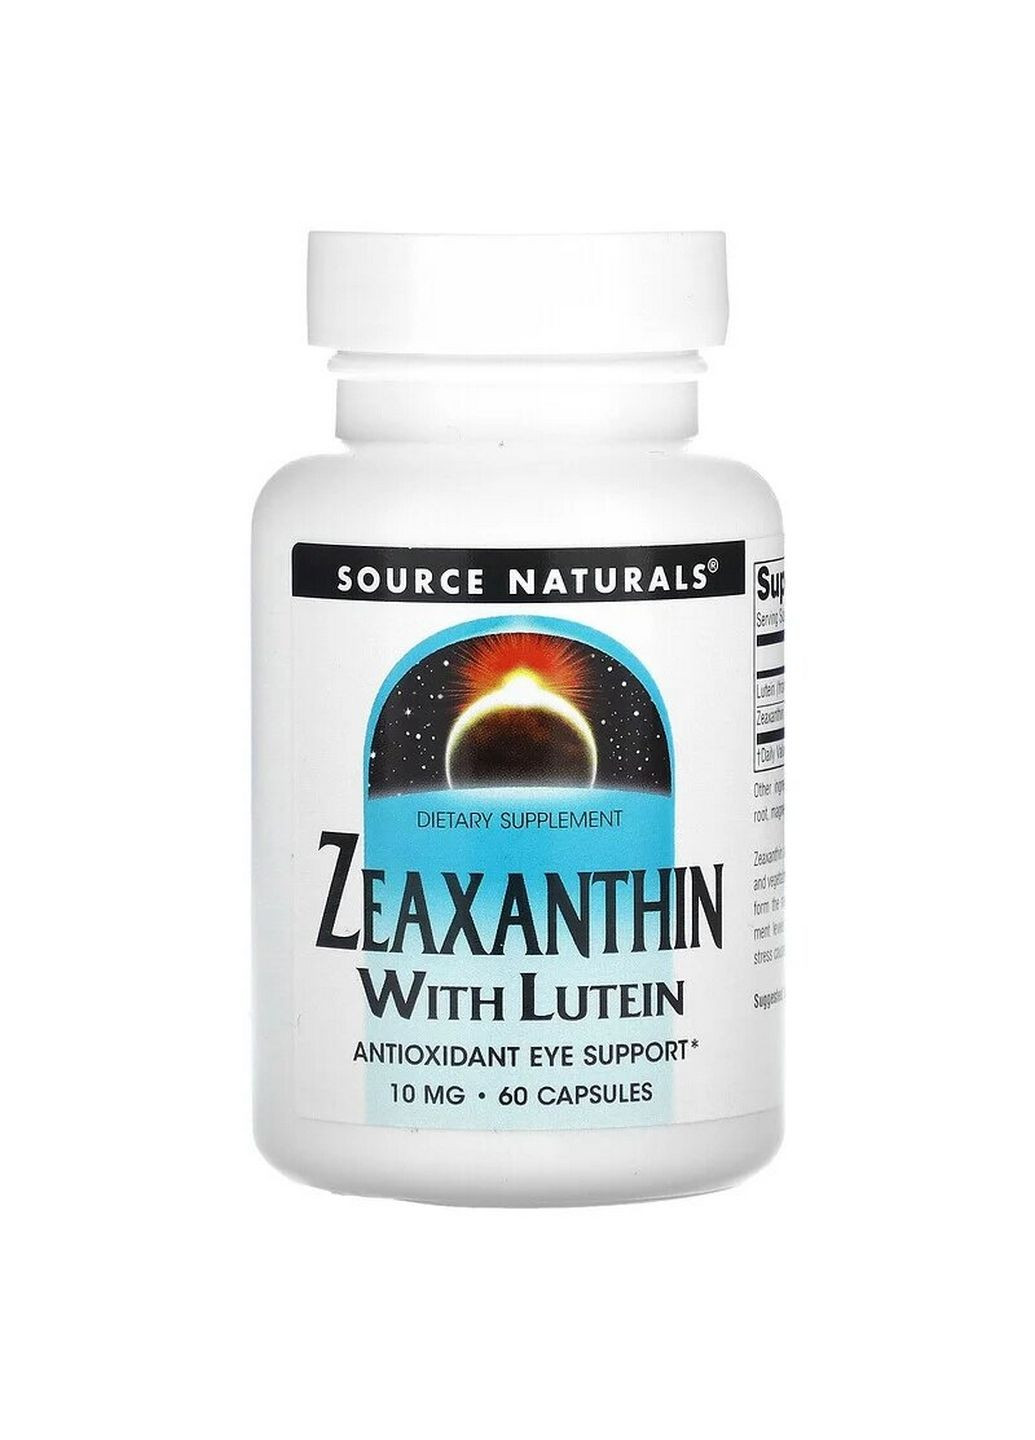 Натуральная добавка Zeaxanthin with Lutein 10 mg, 60 капсул Source Naturals (293418005)